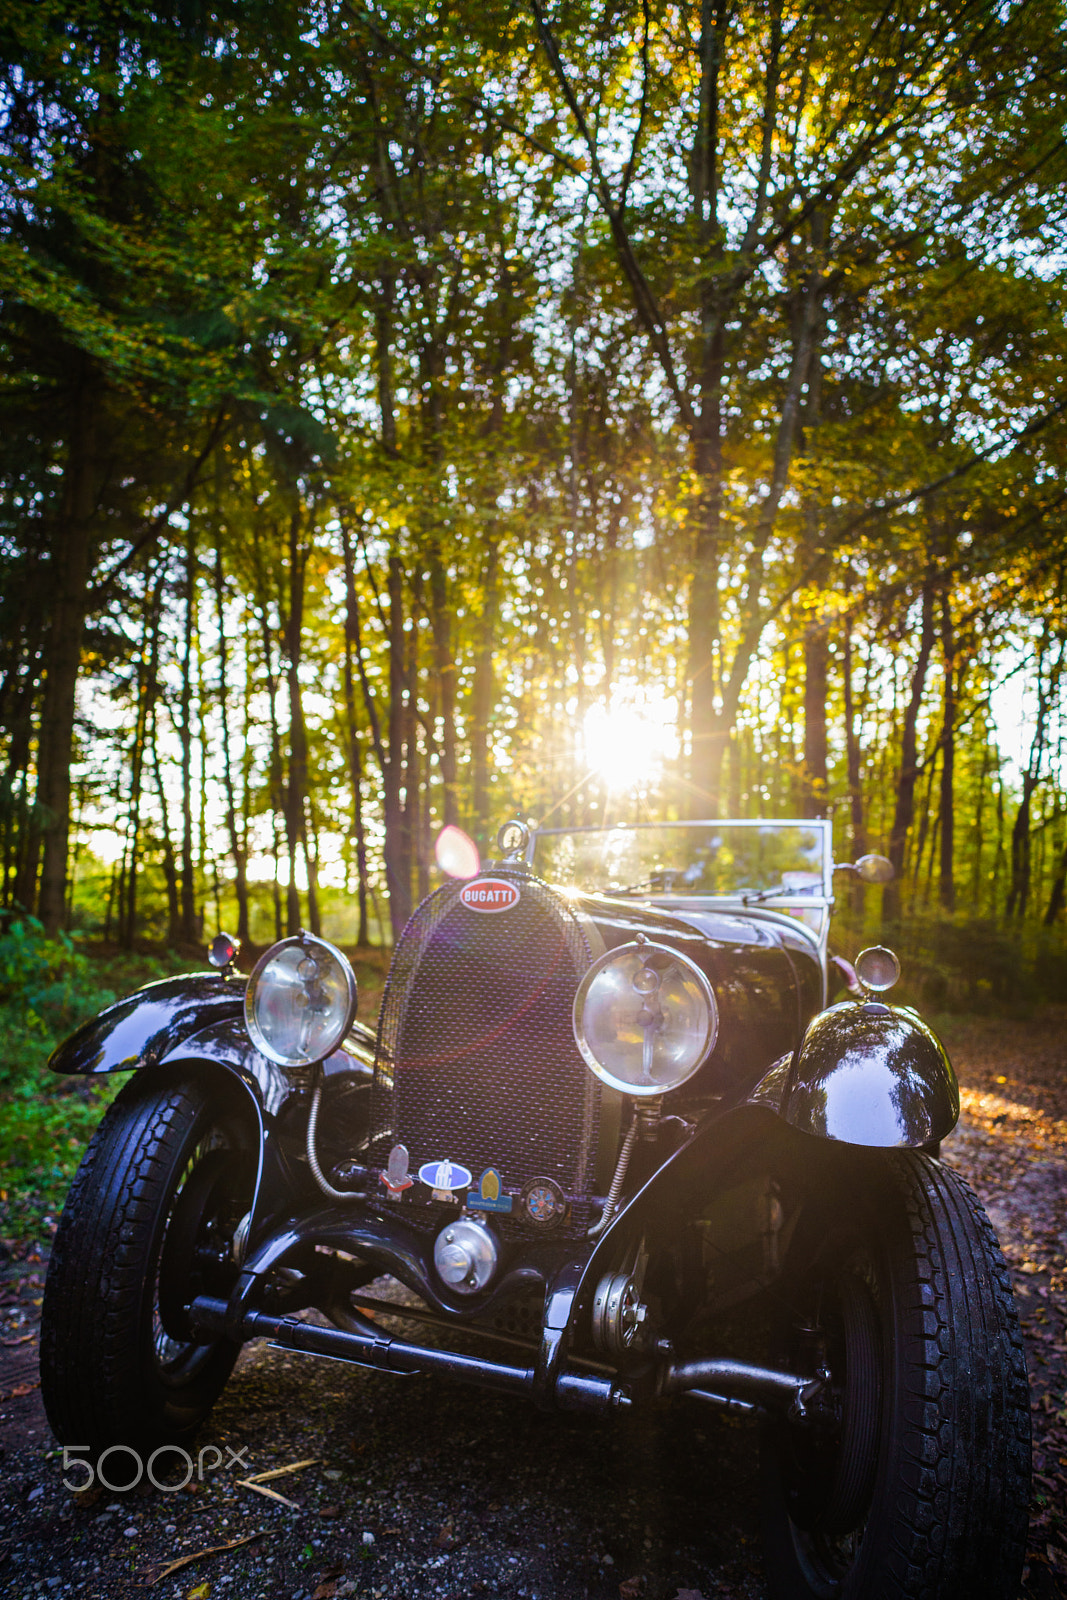 Sony a7R II + E 21mm F2.8 sample photo. Oldtimer bugatti in the woods photography